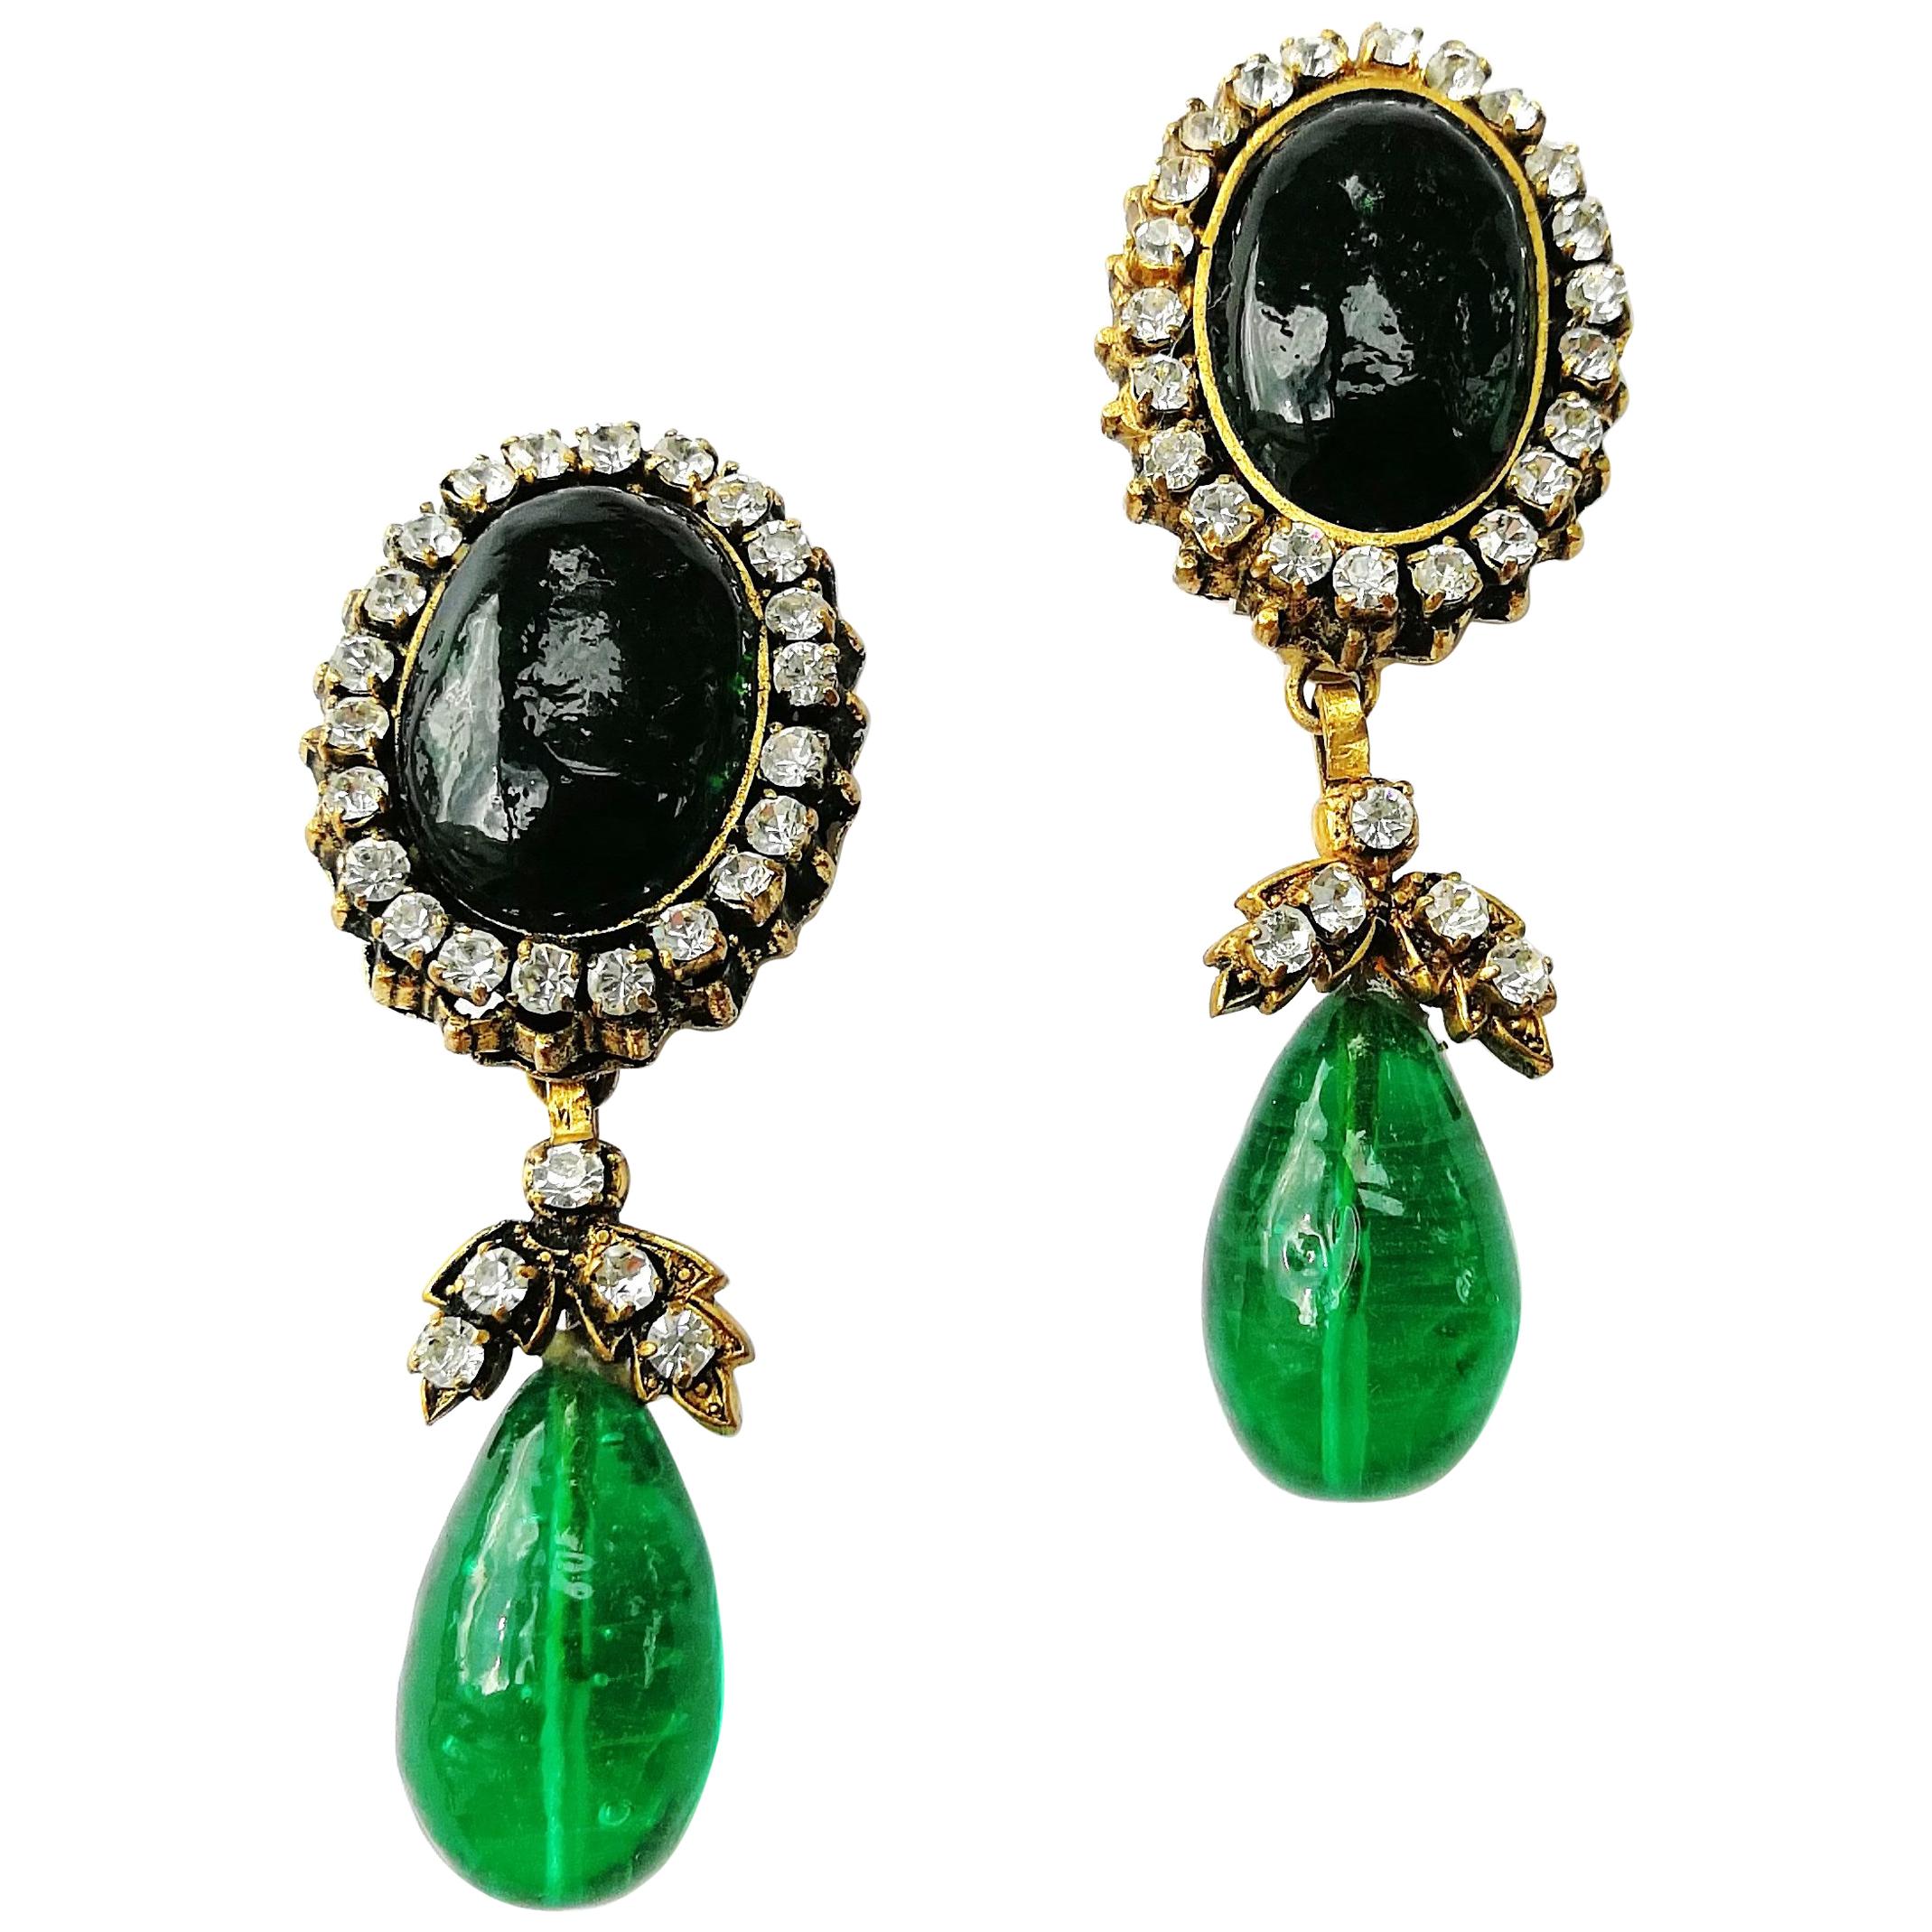 Long emerald poured glass, paste and gilded metal drop earrings, Chanel, 1980s